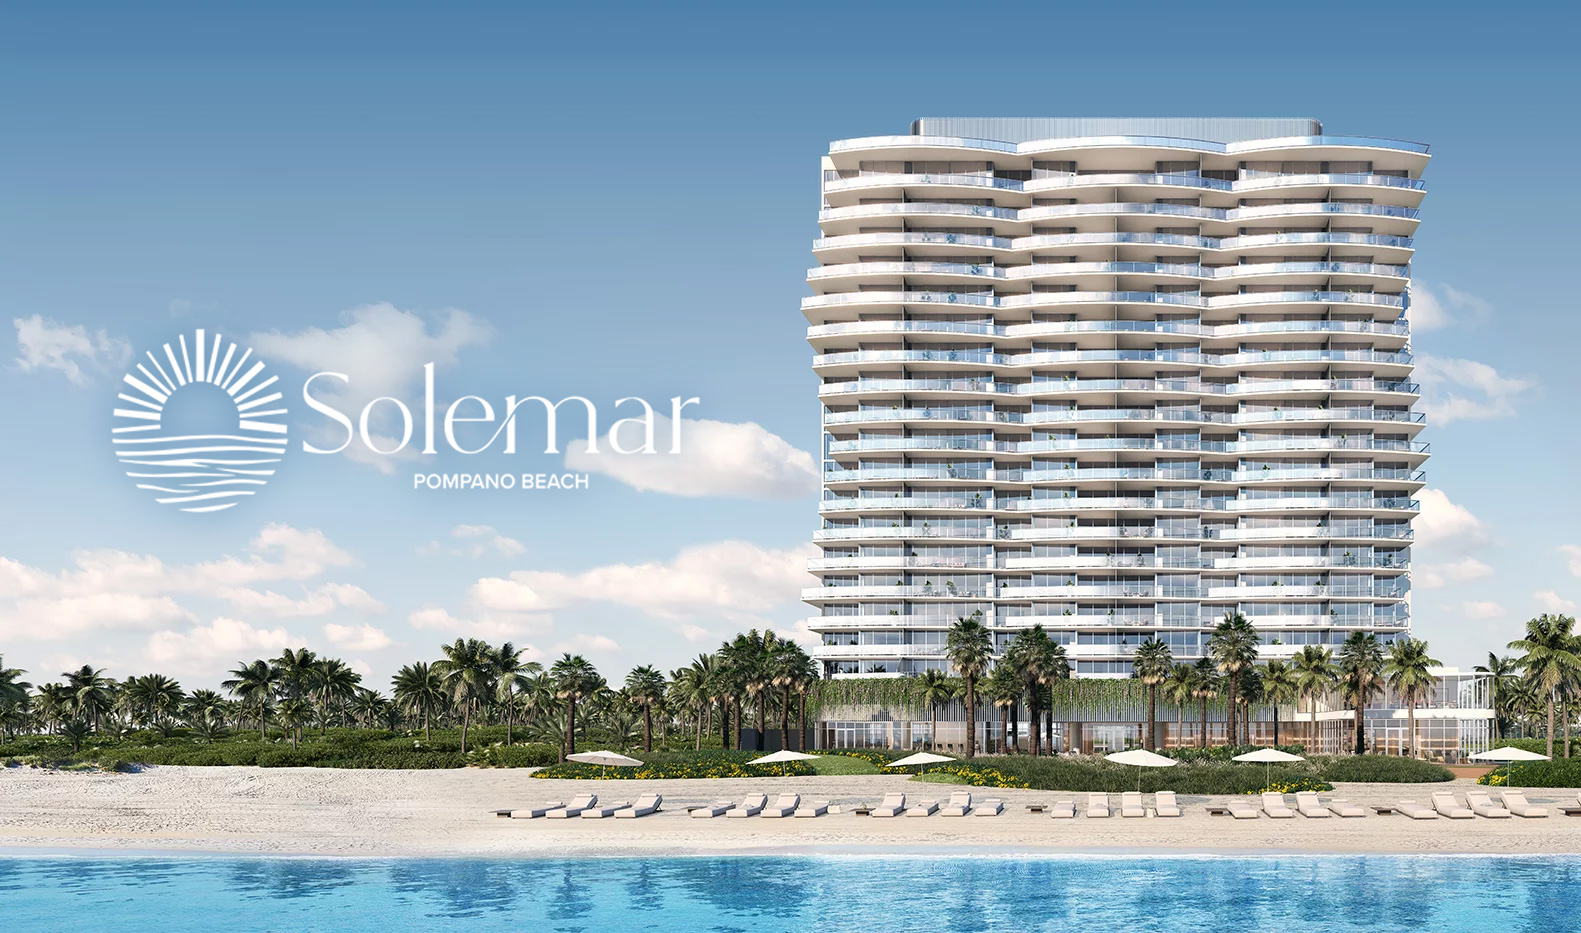 South Florida’s Newest Condos Offer Luxury Beachfront Living